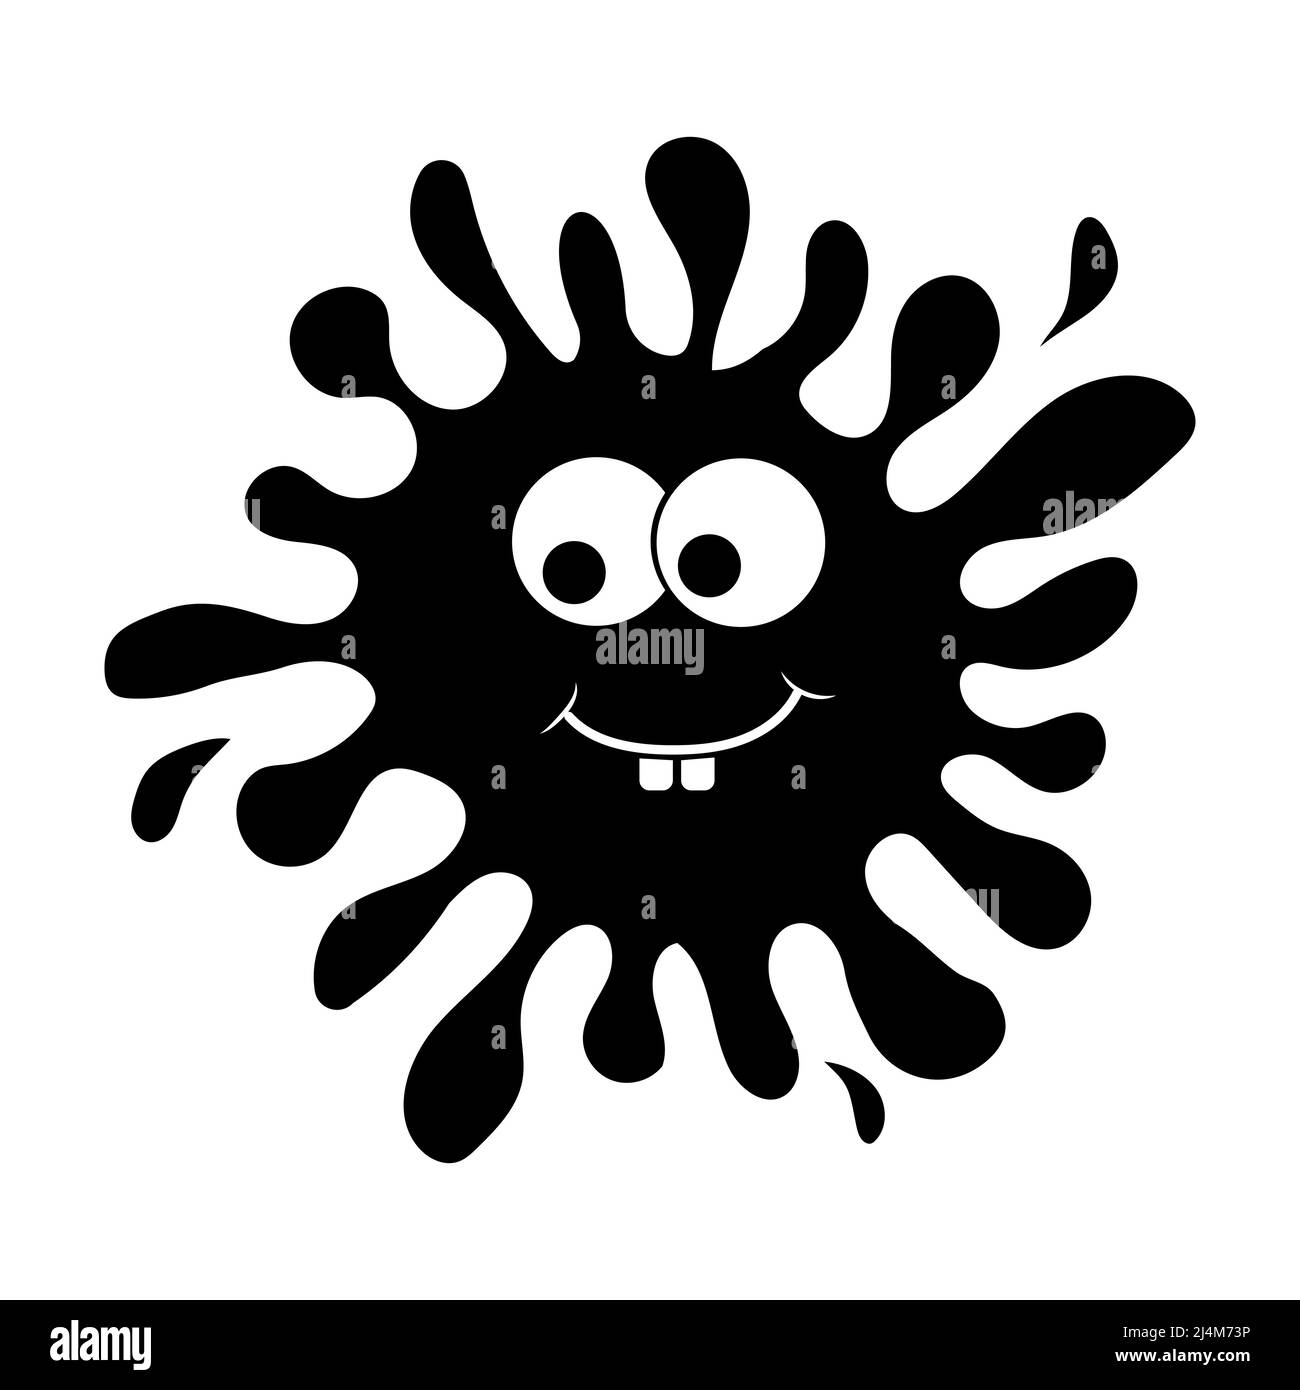 blob character with emotion, isolated vector illustration Stock Vector